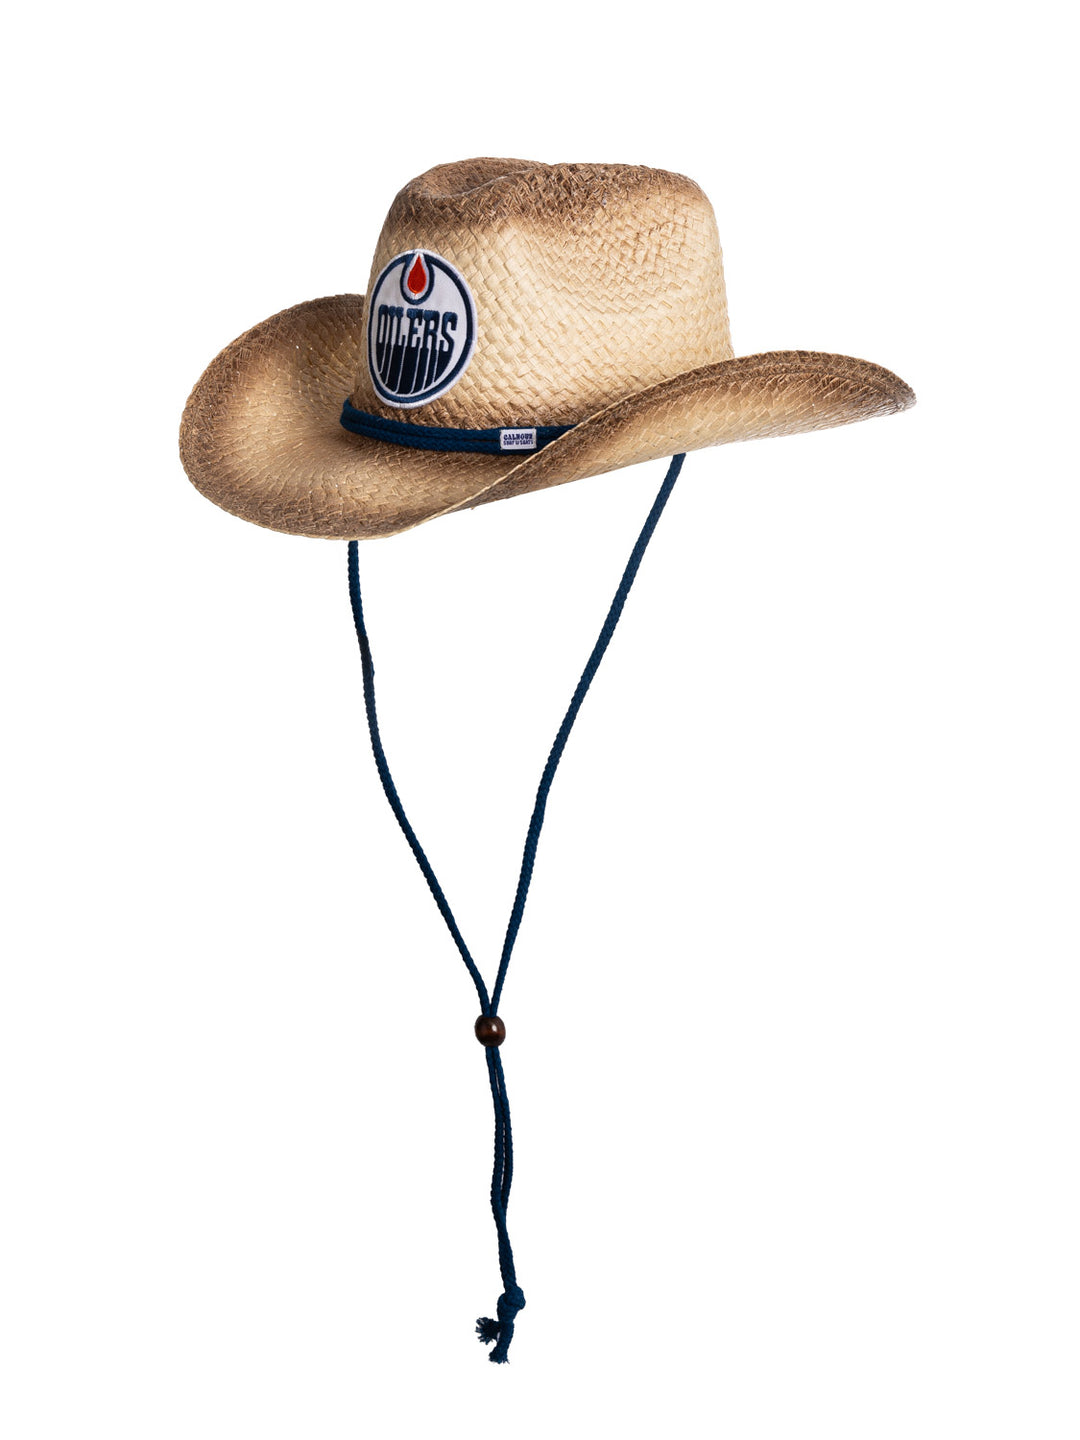 Officially Licensed NHL Edmonton Oilers Cowboy Hat